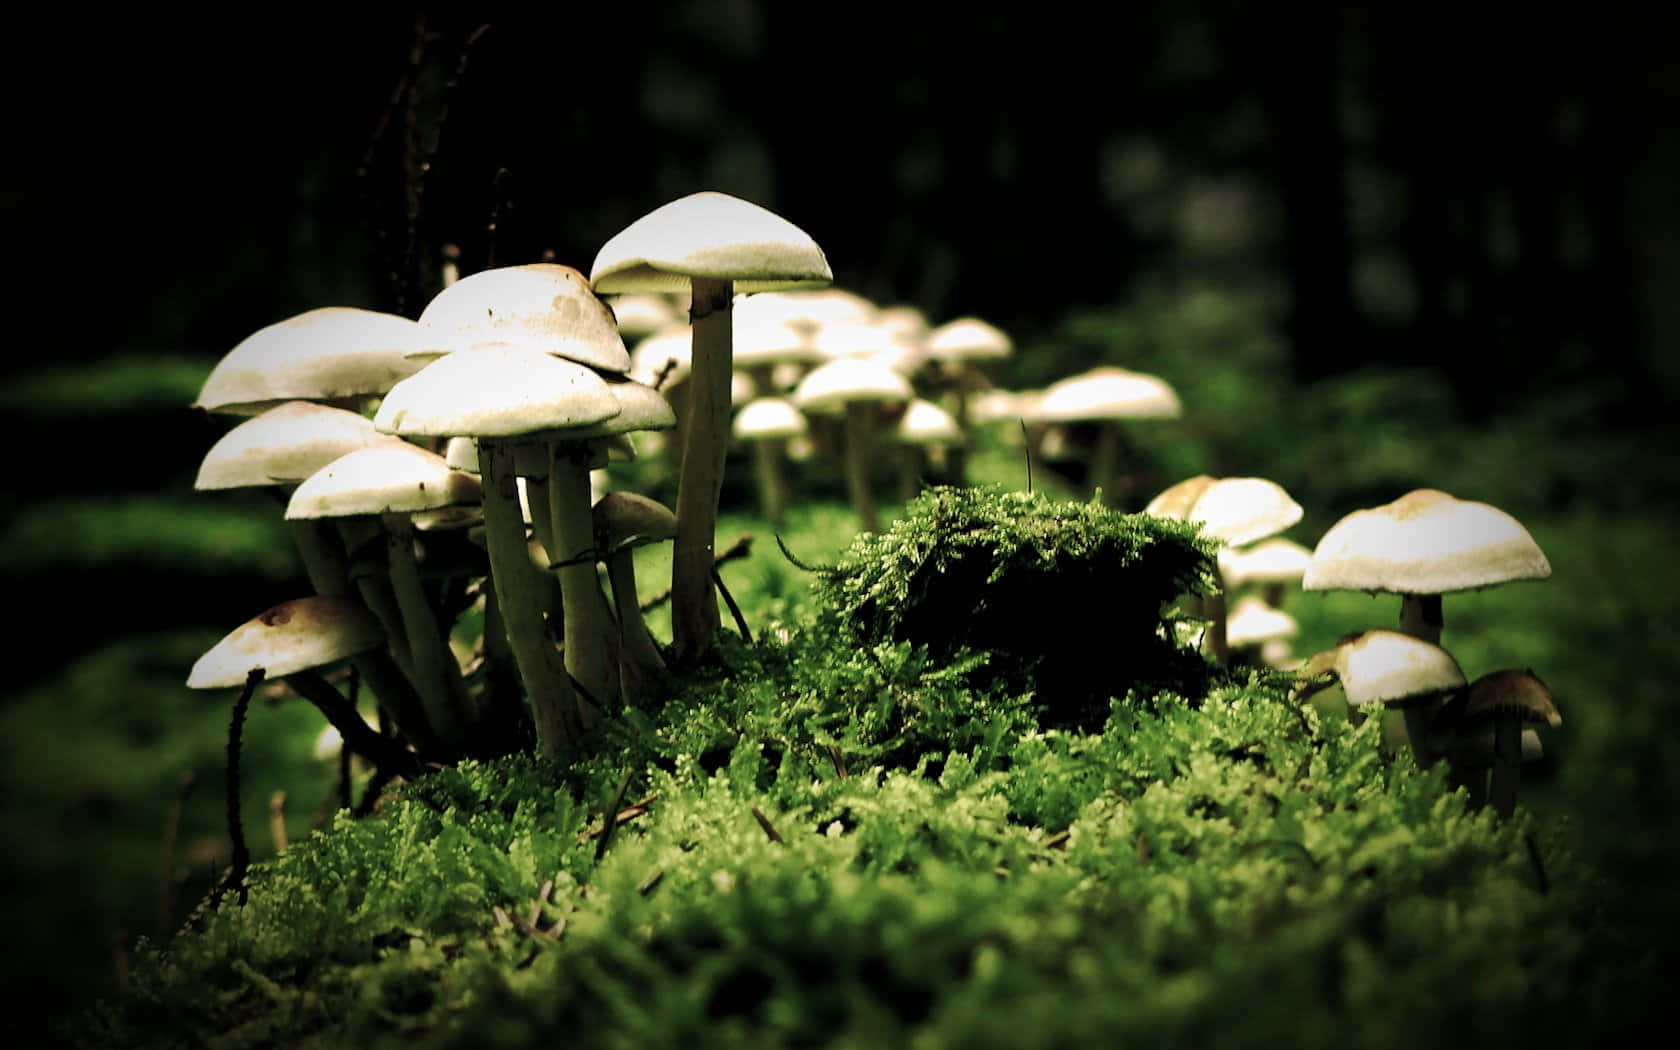 Bonnet Fungus Cluster On Mossy Ground Wallpaper